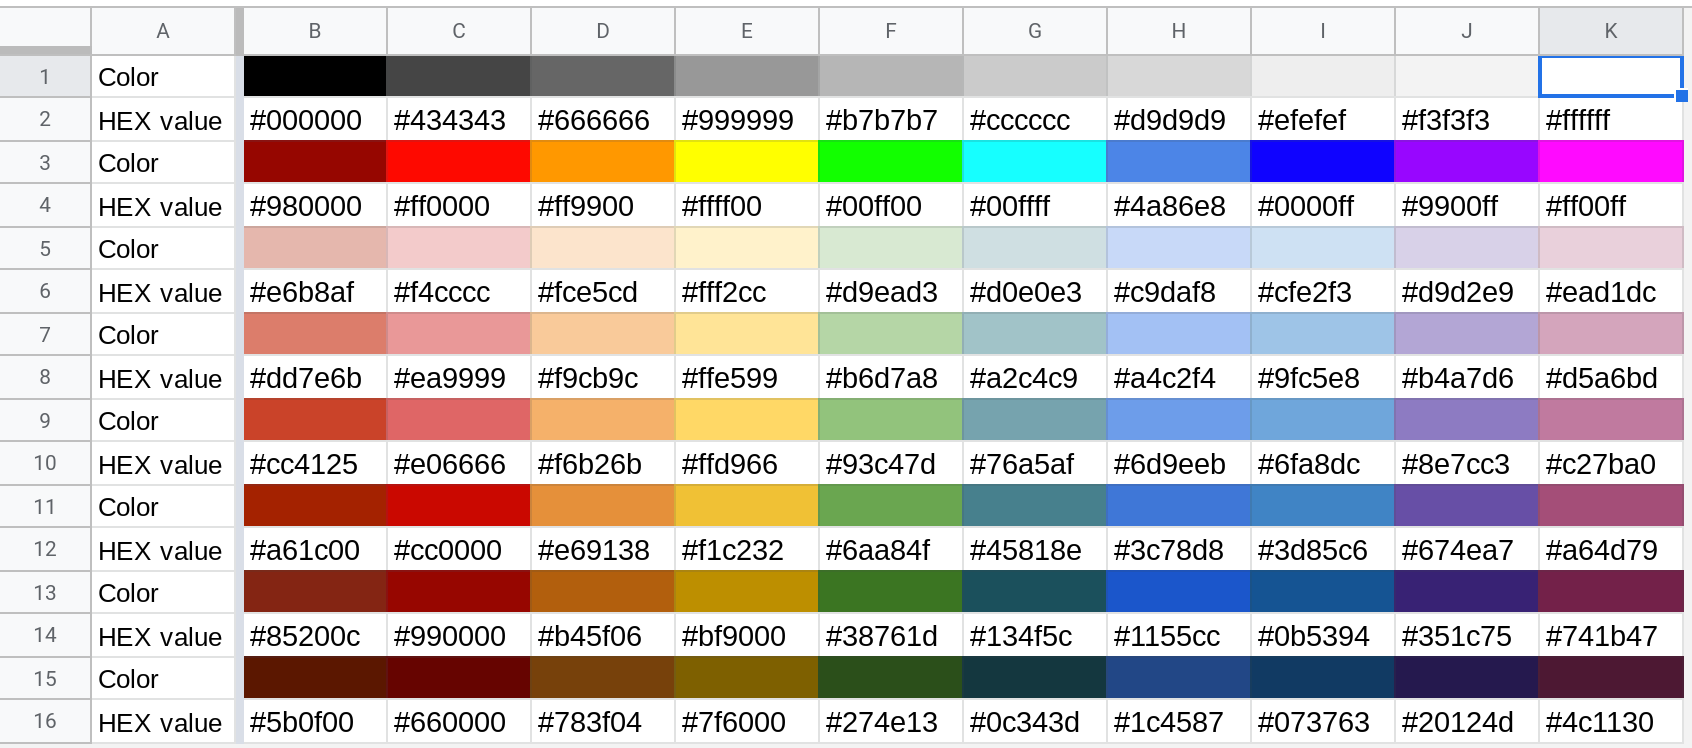 A screenshot of the spreadsheet containing the Hex codes for all of the colors in Google Sheets